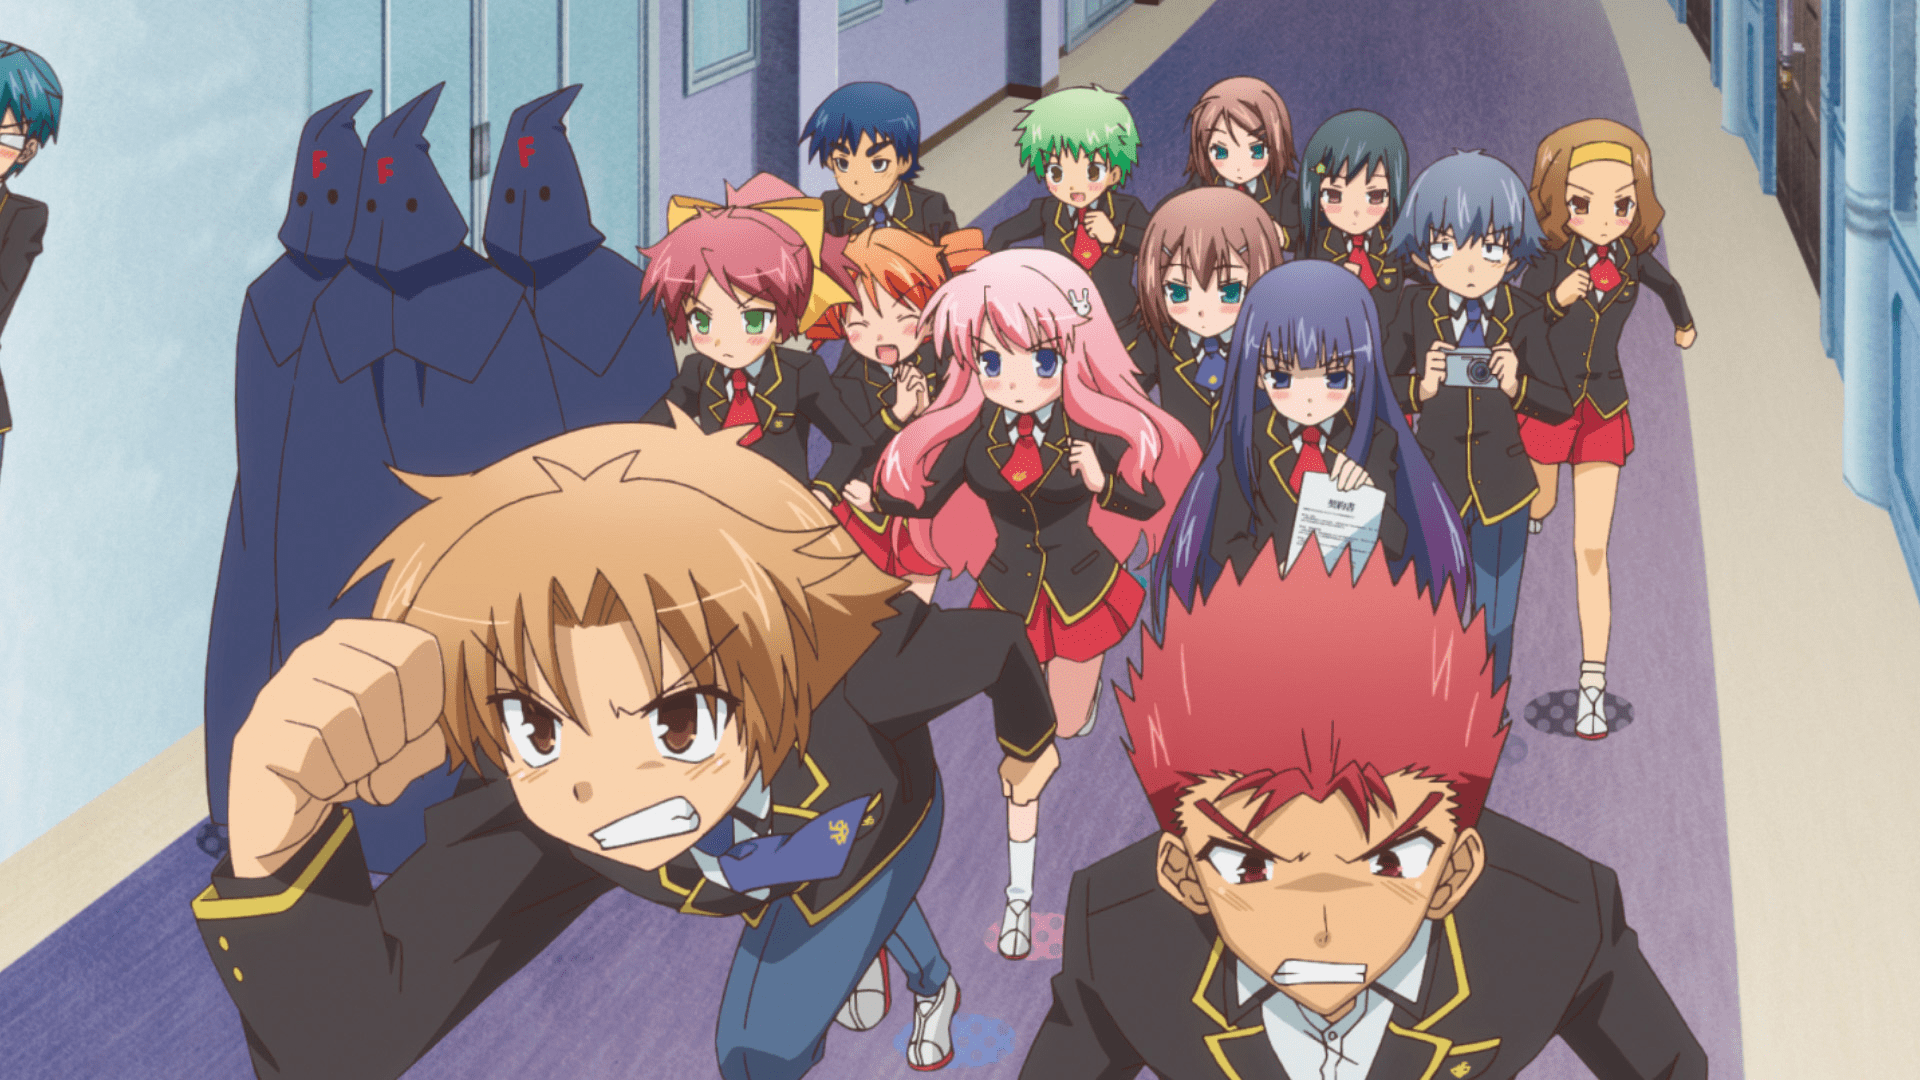 Review Anime Baka and Test